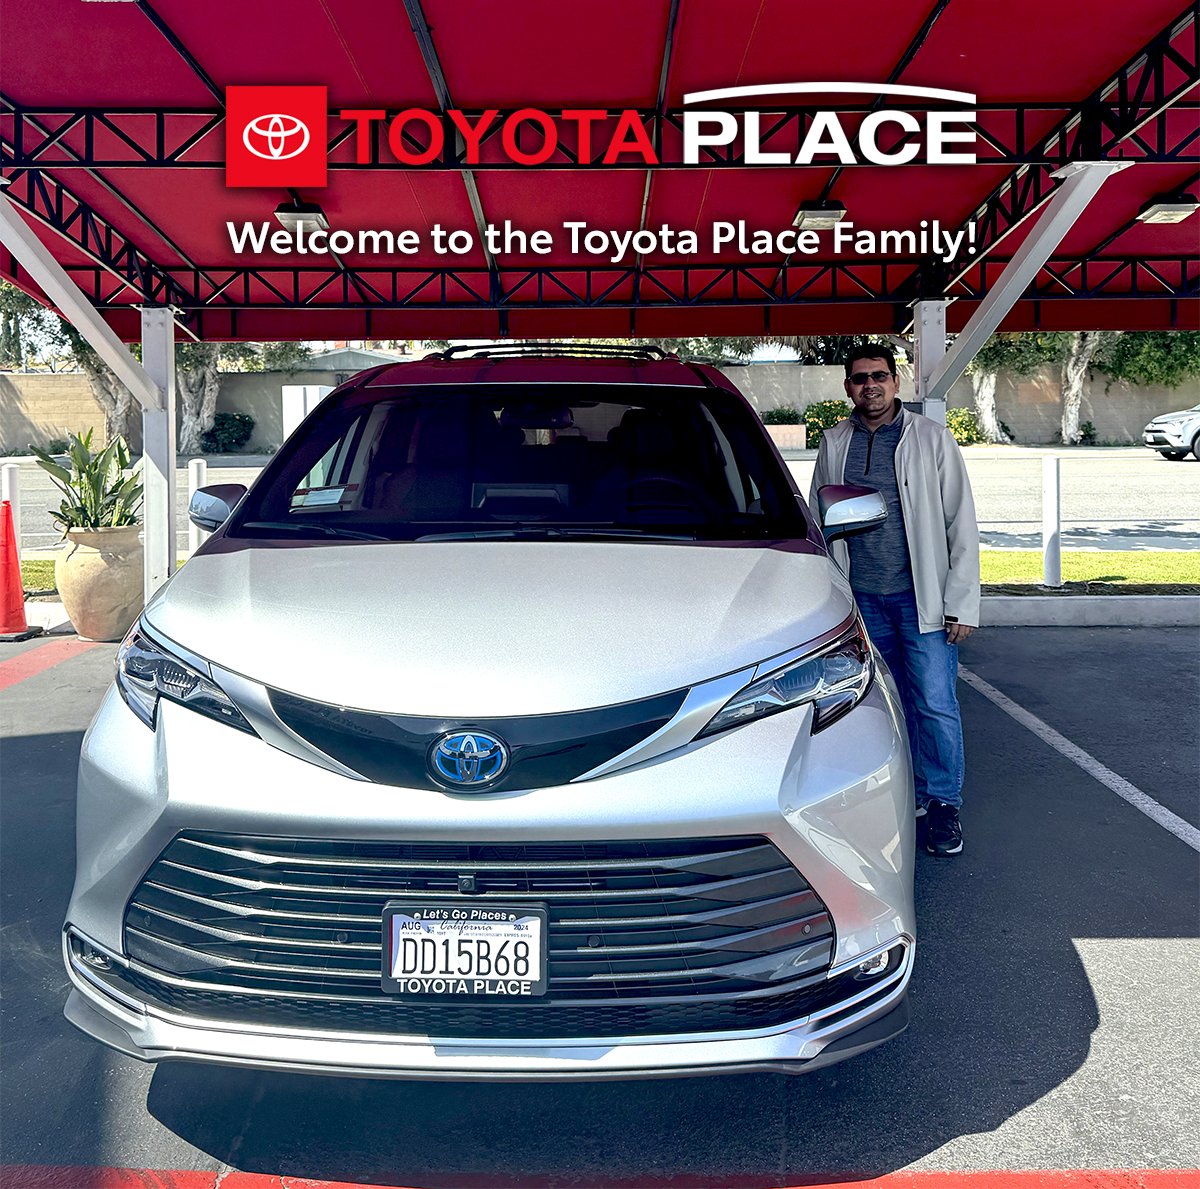 🙌🏻Hooray...❤️Gorgeous new Toyota 😍Sienna ⚡Hybrid minivan. 🎉 Congratulations 👏🏻 and 🤗thank you for choosing 😊Toyota Place in 🌴Orange County. We wish you many wonderful ✨memories going places in your new #Sienna minivan. #toyotaplace #ToyotaSienna